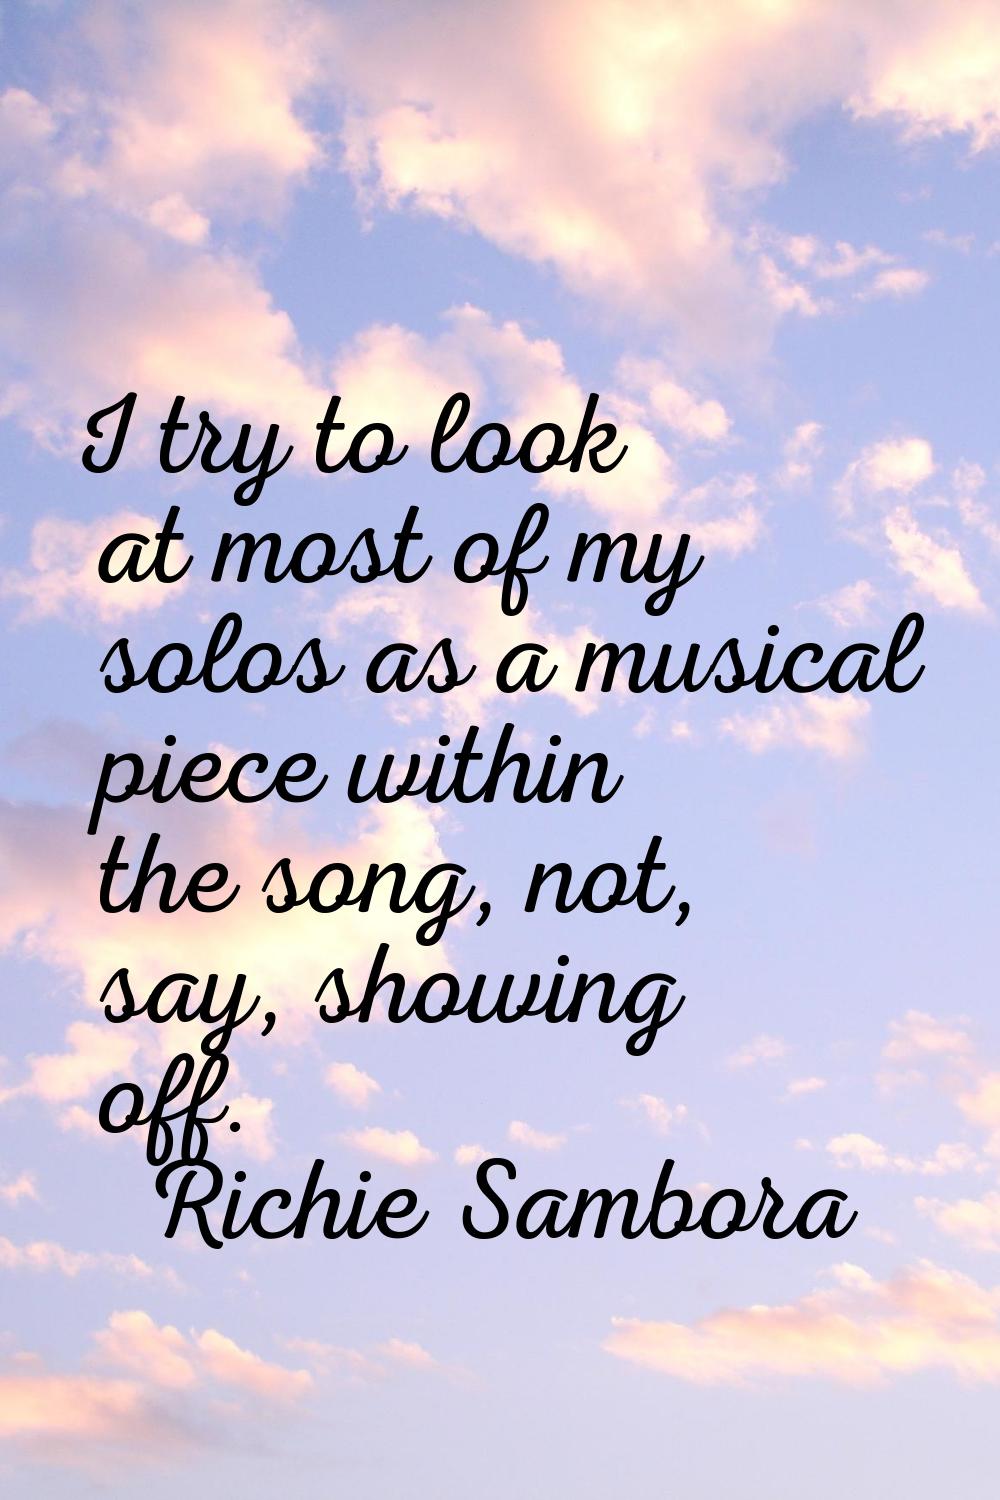 I try to look at most of my solos as a musical piece within the song, not, say, showing off.